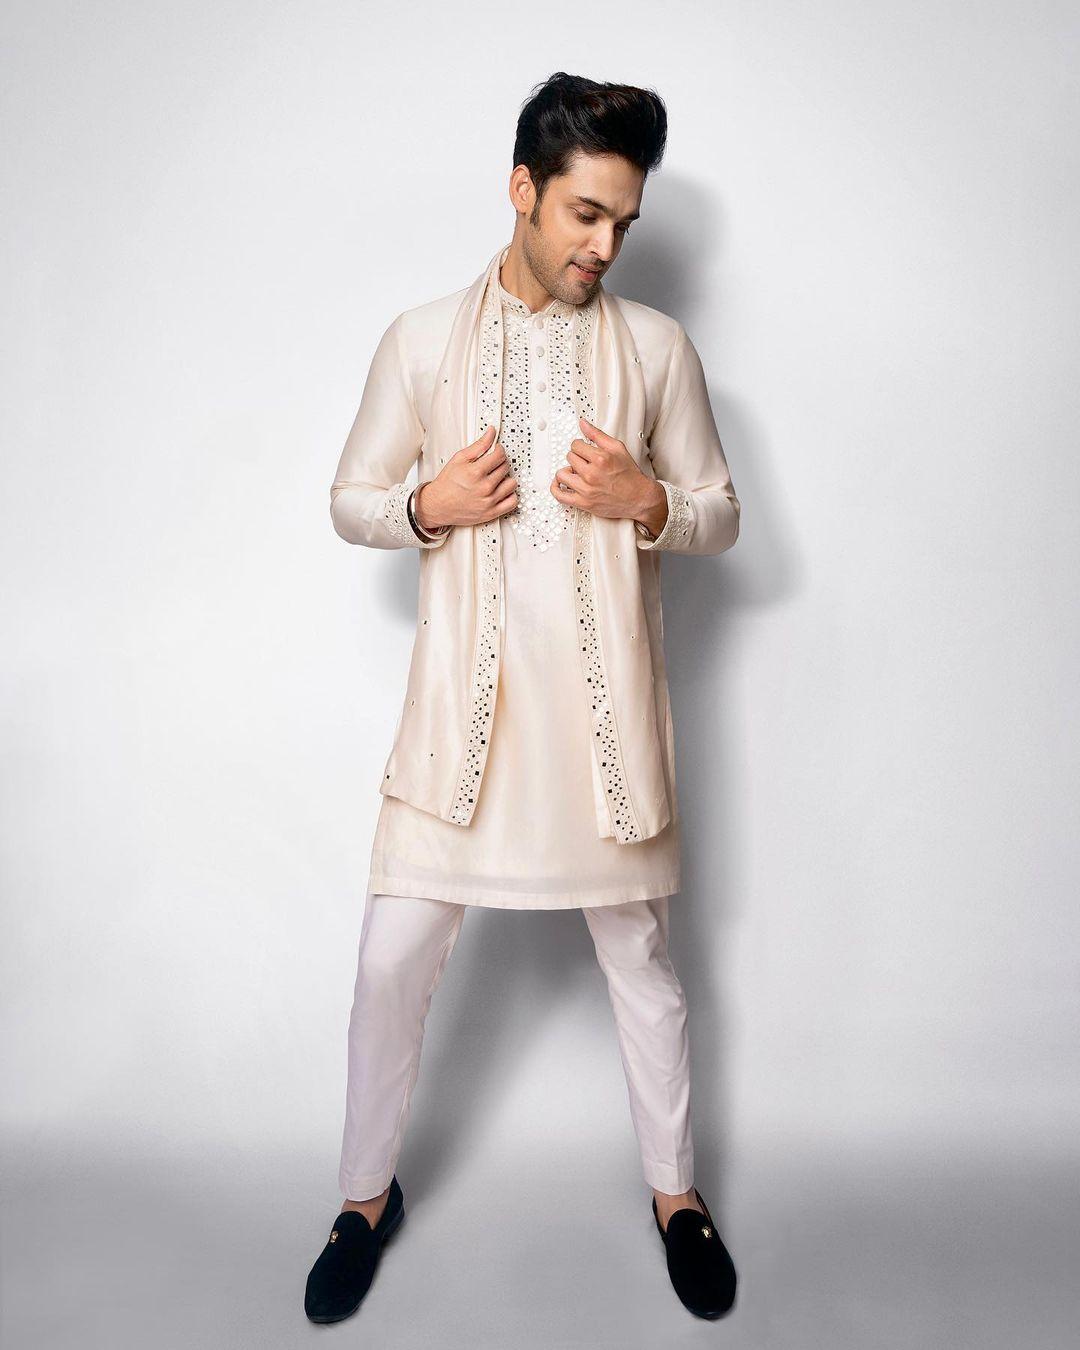 White is the easiest choice when it comes to opting for a stylish outfit. Parth opted for a plain white kurta and paired it with matching pants and a stylish overcoat. The actor's sherwani has mirror work, which enhances his overall appearance